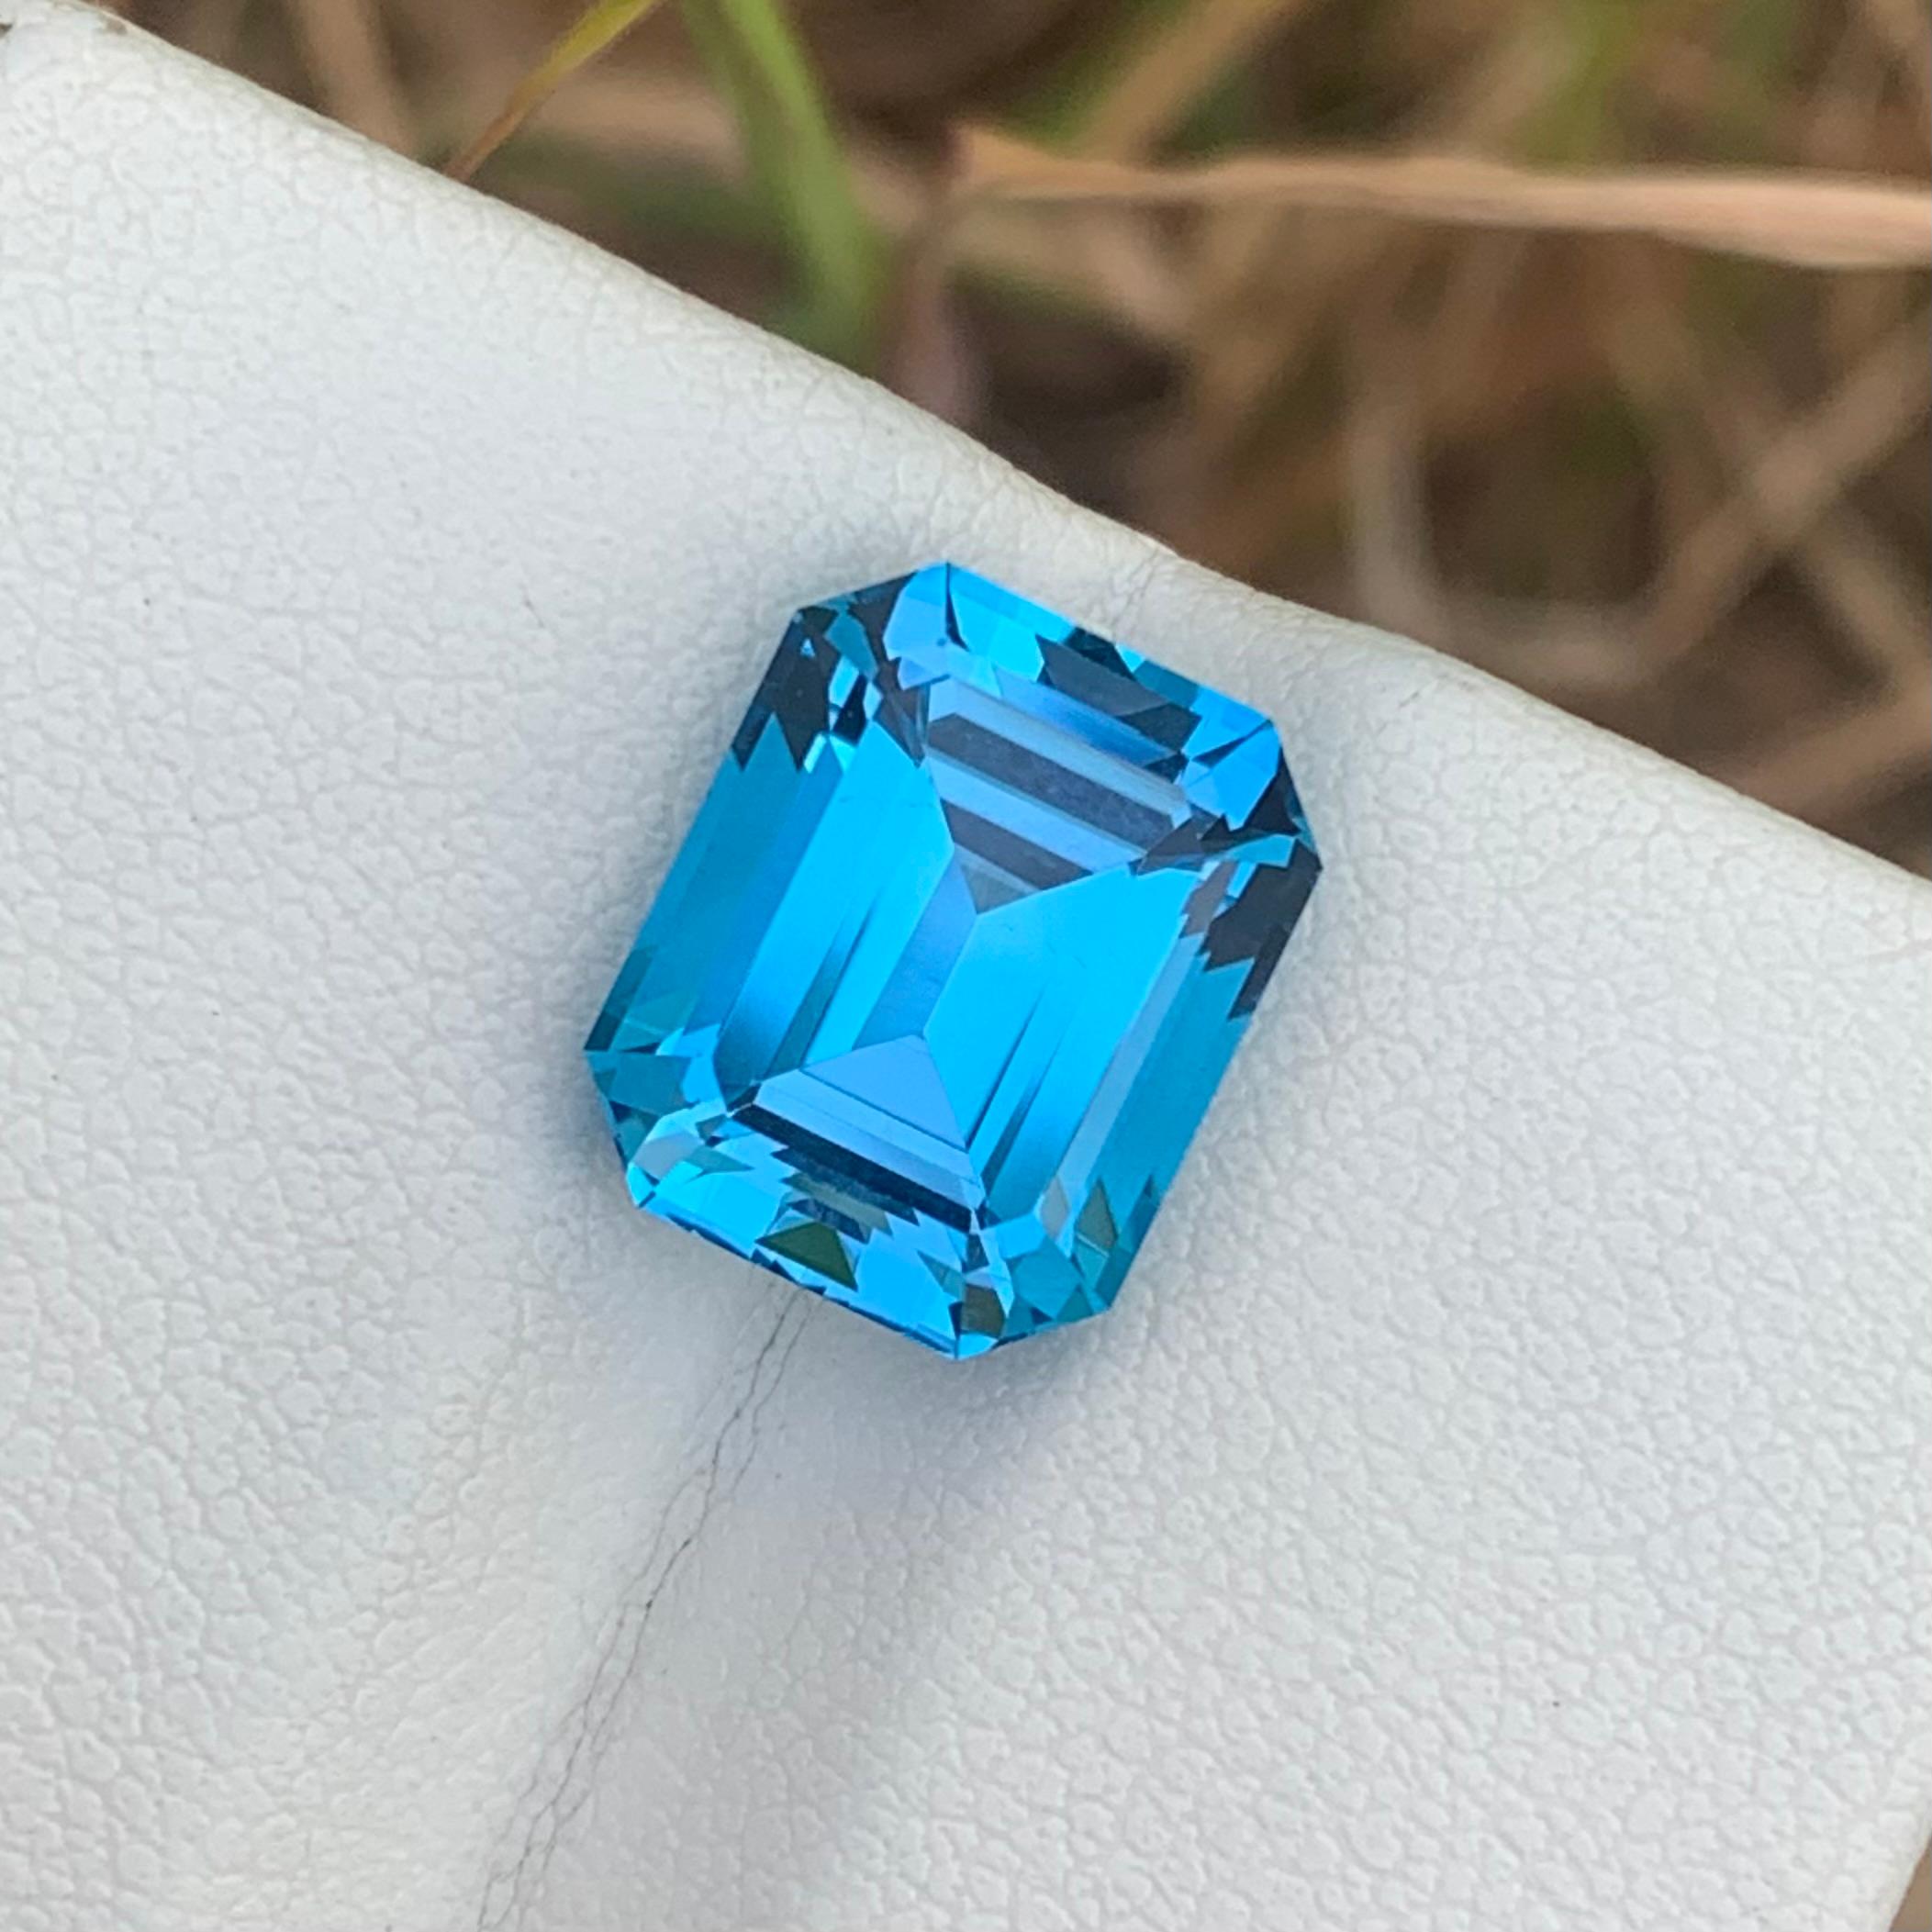 Loose Blue Topaz
Weight: 7.45 Carats 
Dimension: 11.5x9.5x7.3 Mm
Origin: Brazil
Shape: Emerald 
Color: Blue
Treatment: Non
Certificate: On Client Demand 
Electric blue topaz is a striking and vibrant gemstone celebrated for its vivid blue color and